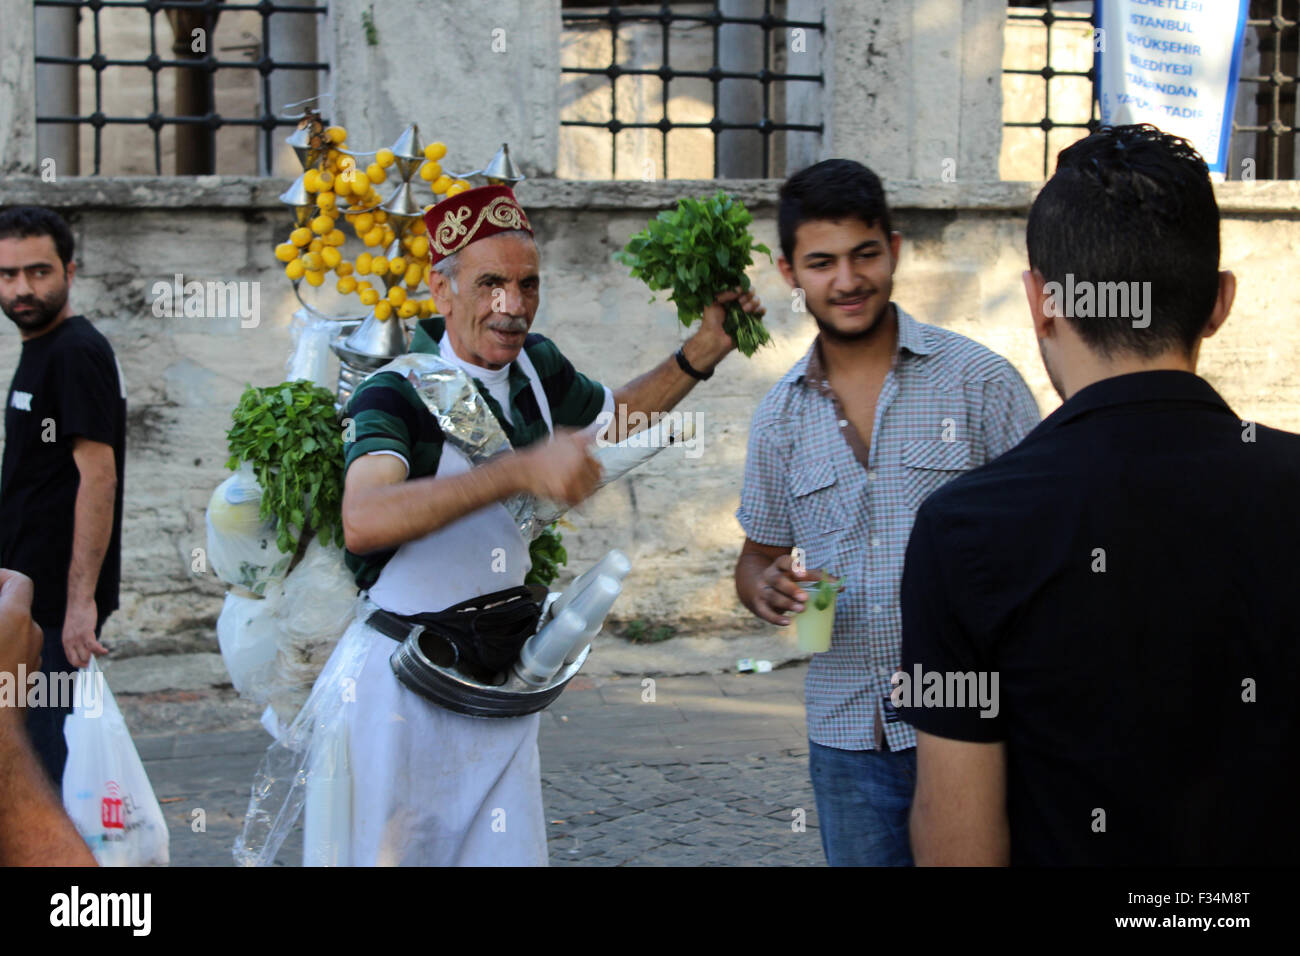 Istanbul, Turkey - September 20, 2015: seller of lemonade poses for the camera in the hands of with parsley Stock Photo